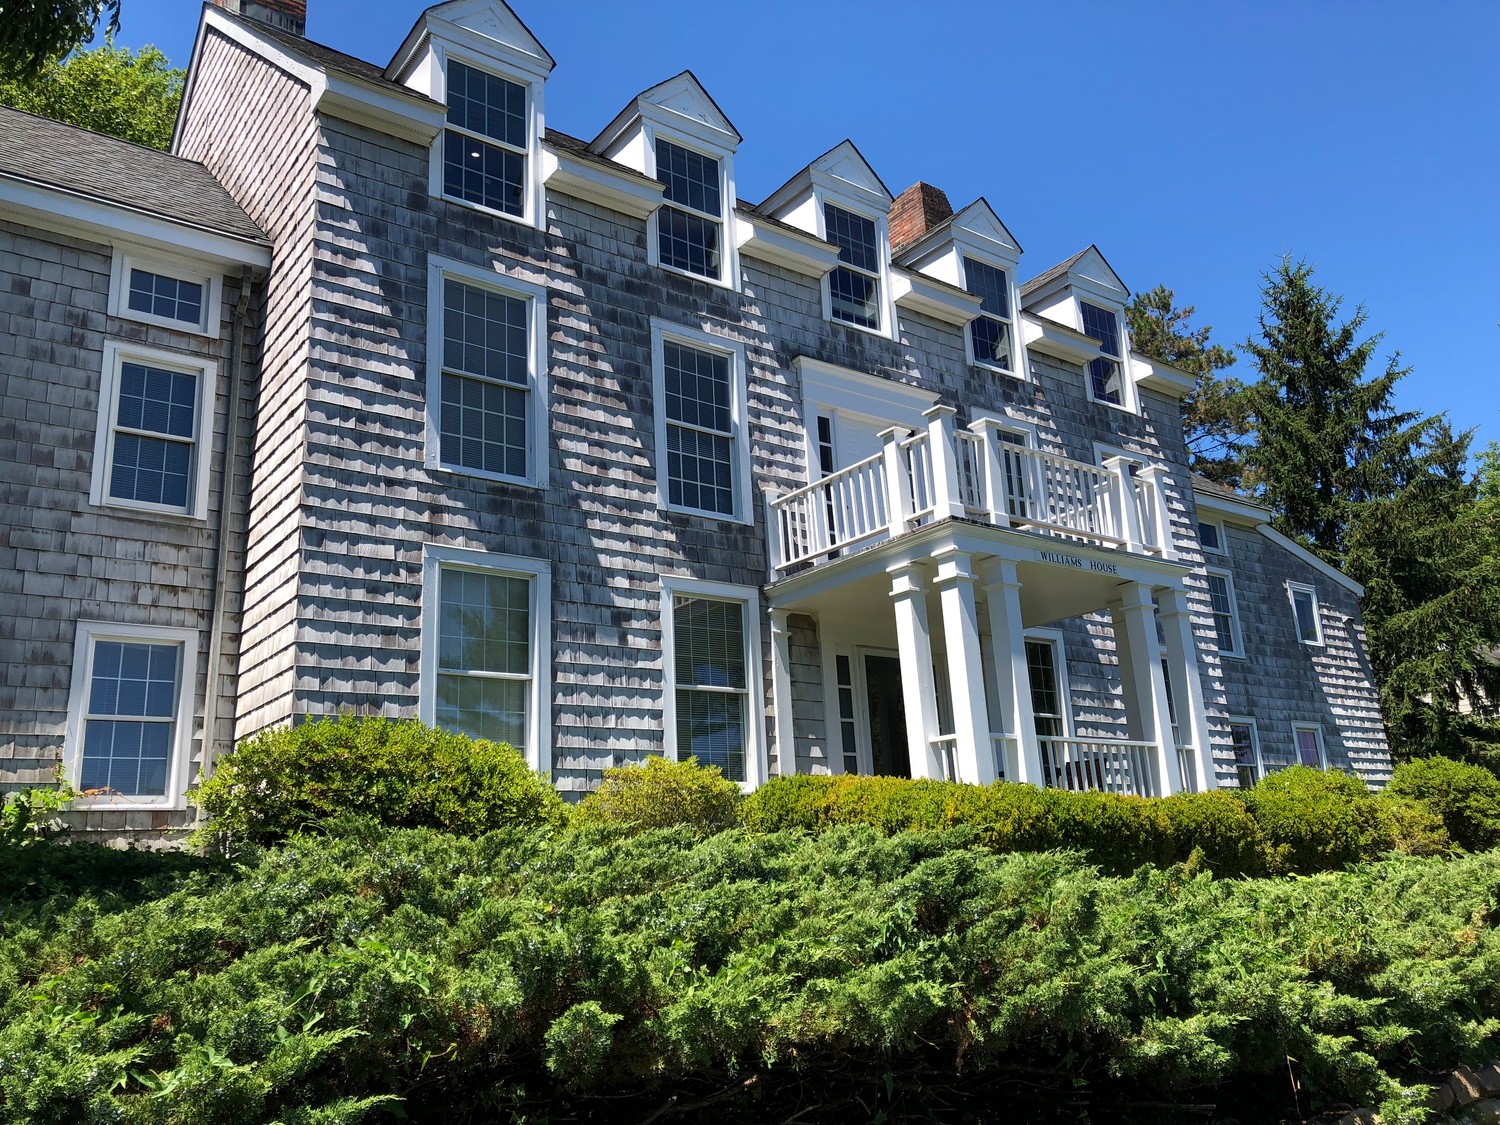 Many of CSHL's buildings look like they belong in a New England fishing village. Above, Williams House.